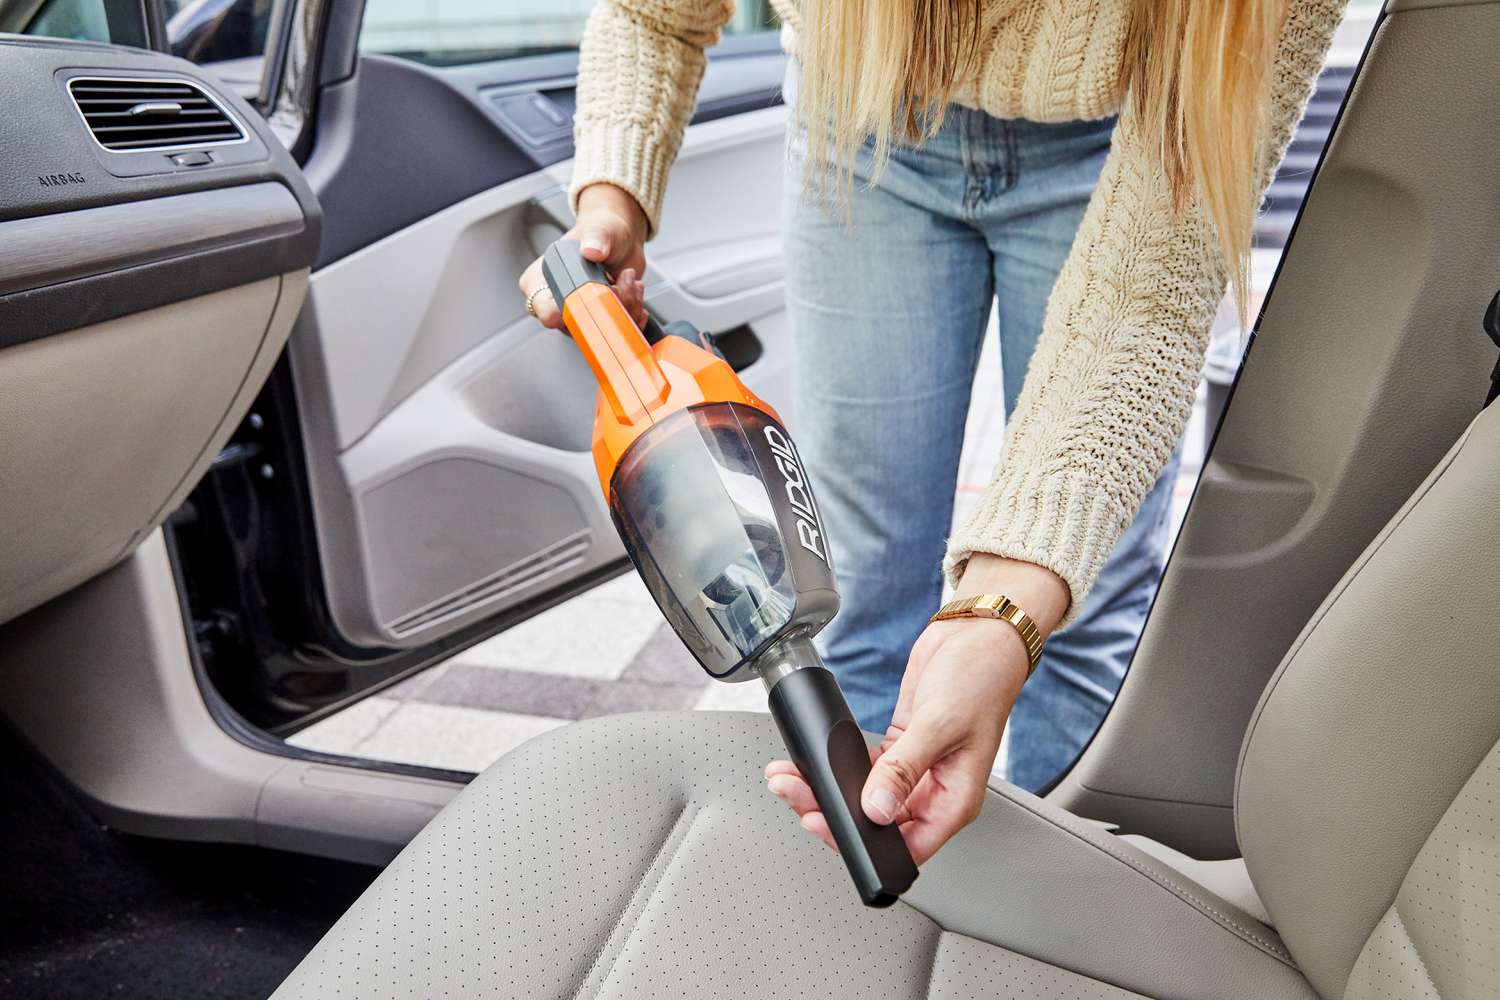 YEAHCO 4-in-1 Car Vacuum Cordless Rechargeable, 10000Pa Car Vacuum Cleaner  High Power Portable Vacuum